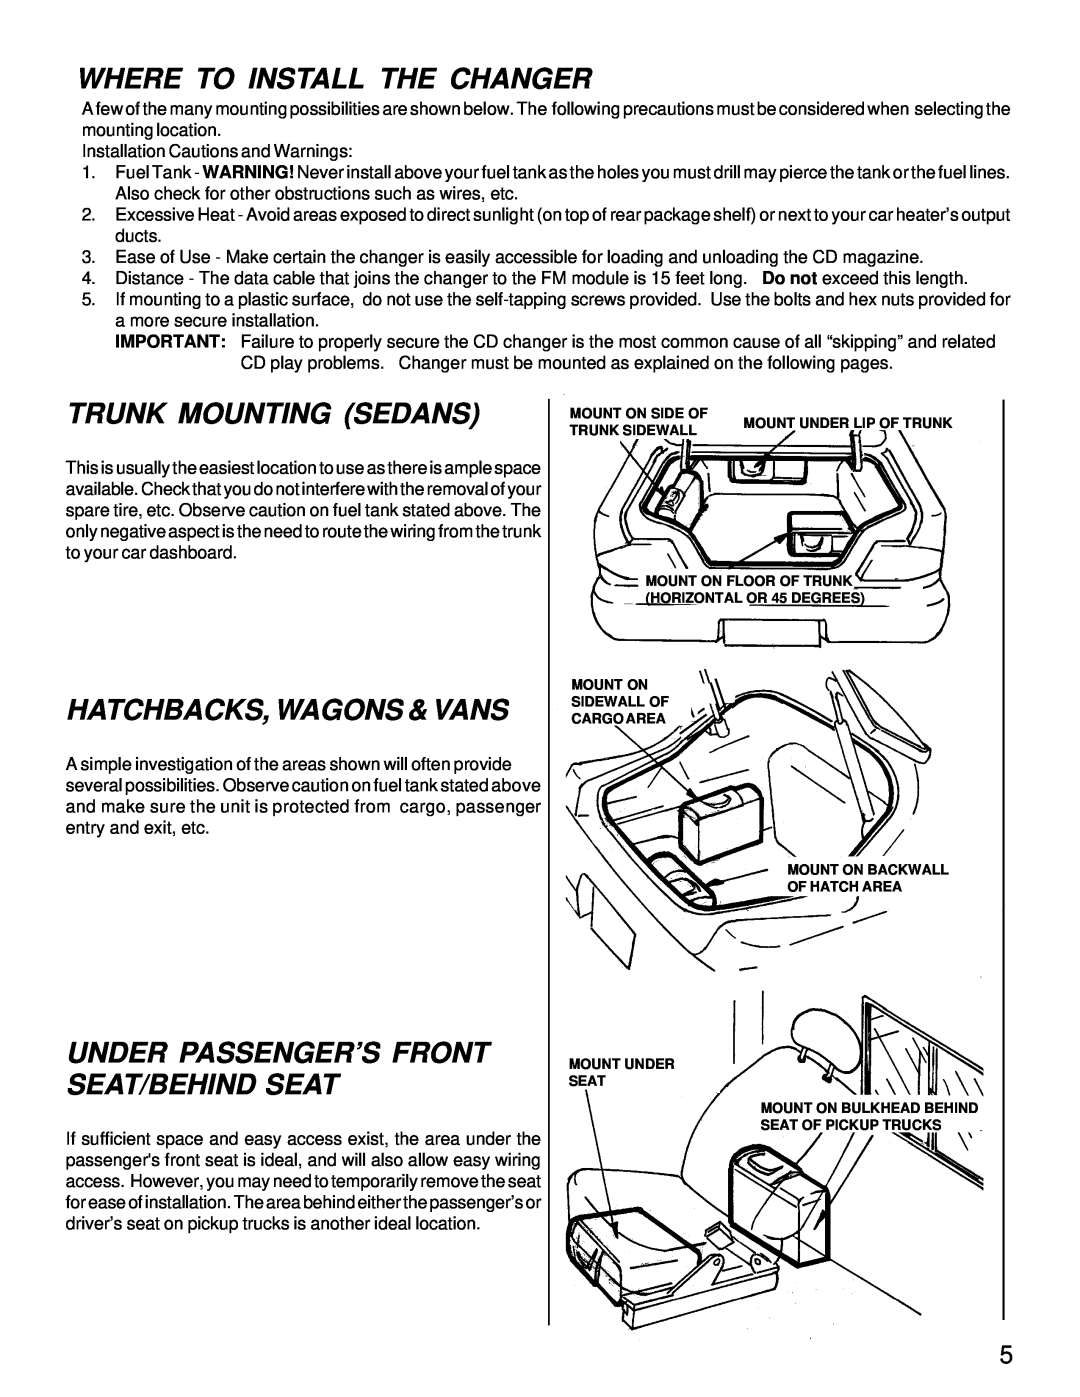 Audiovox ACC56, ACC-56 owner manual Where To Install The Changer, Trunk Mounting Sedans, Hatchbacks, Wagons & Vans 